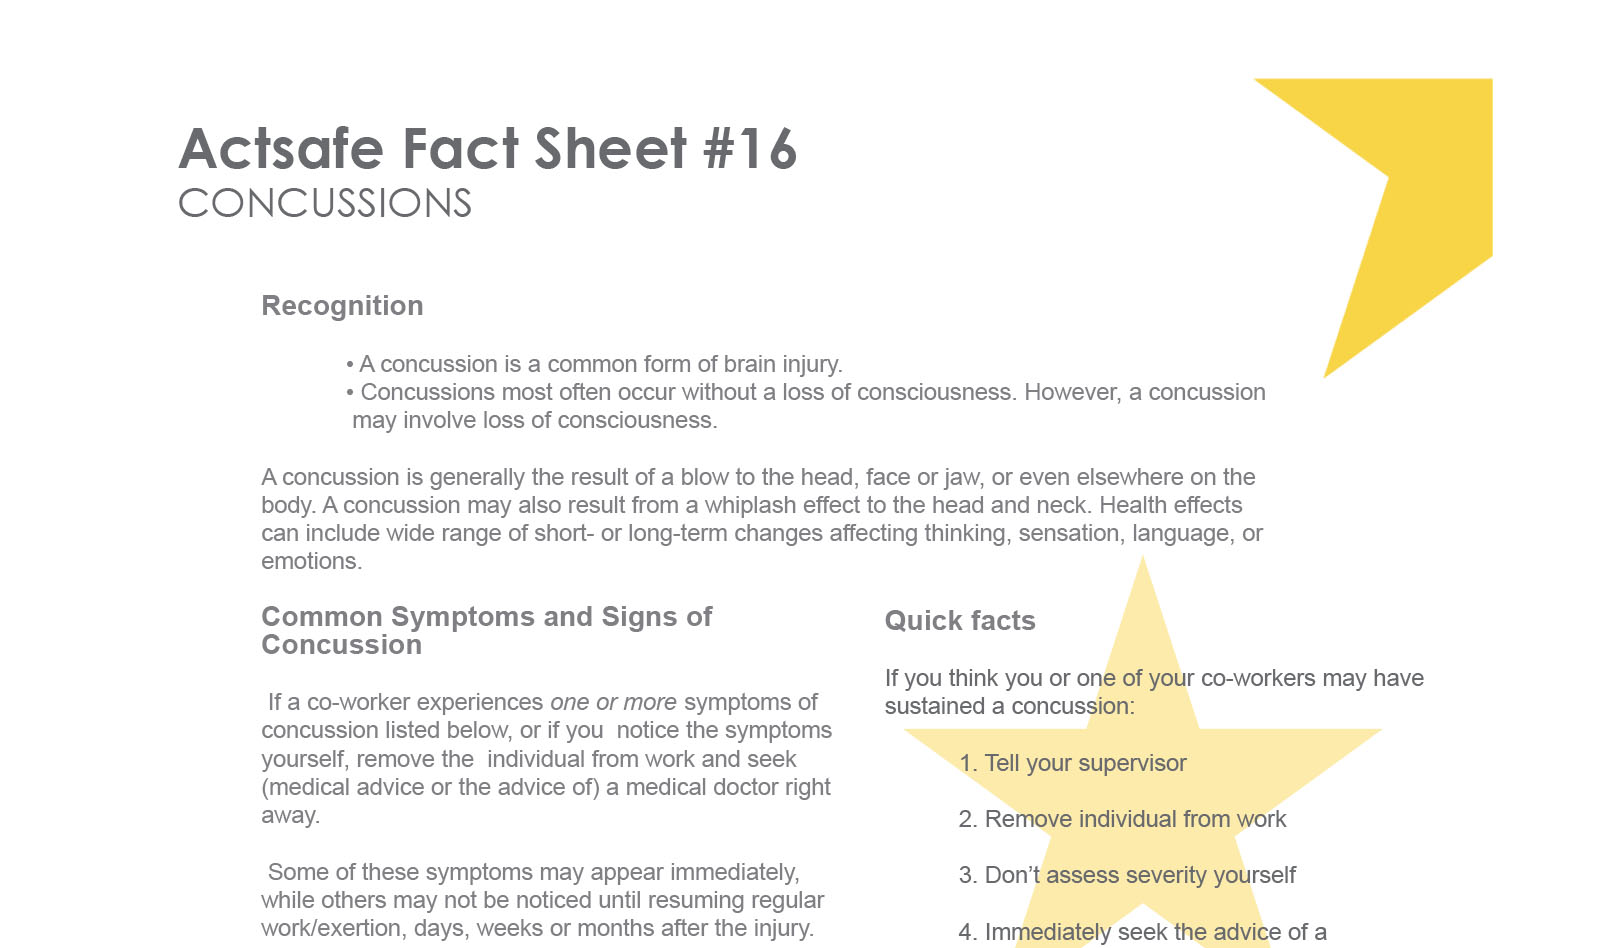 Concussions Motion Picture Fact Sheet